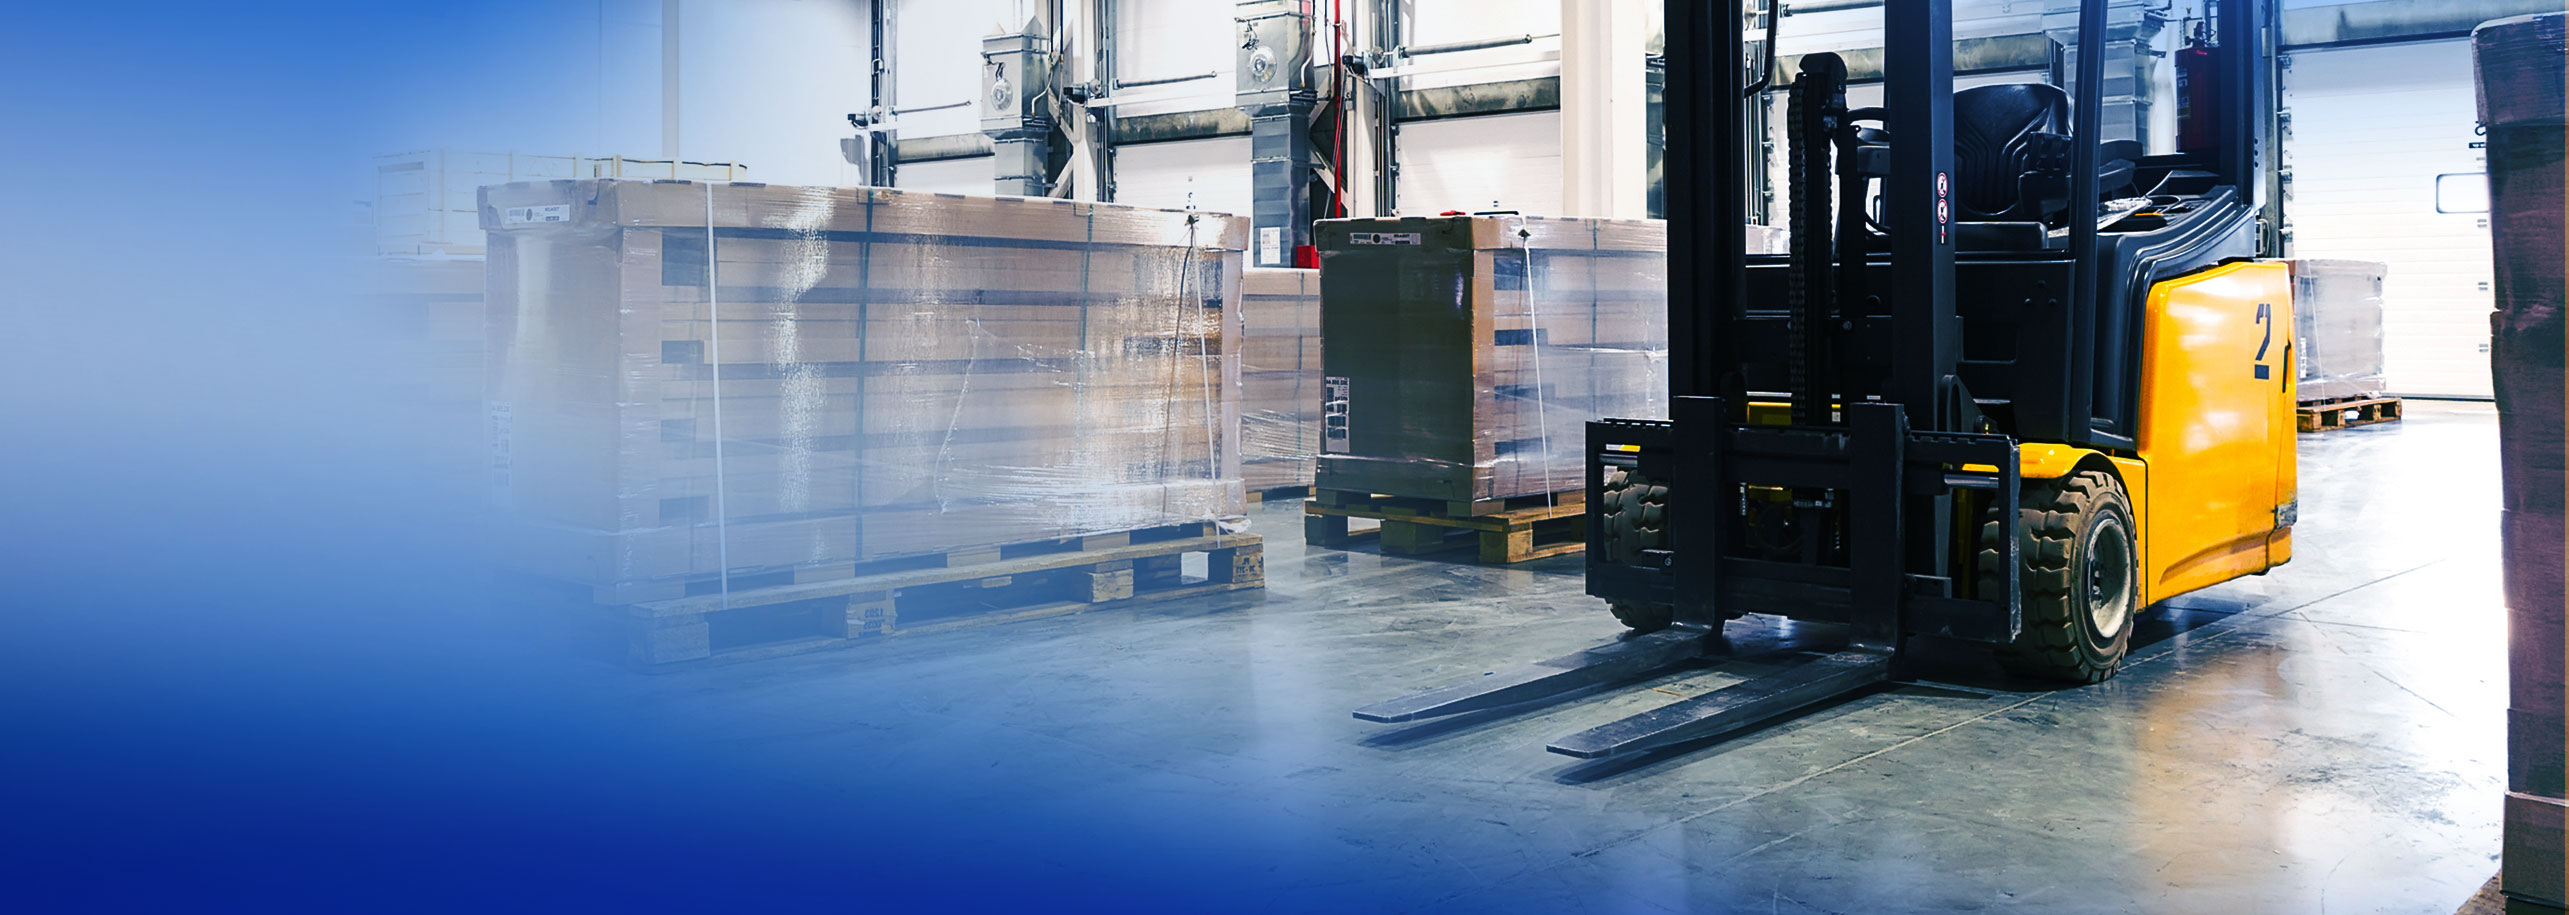 Warehouse Forklift next to pallets of product